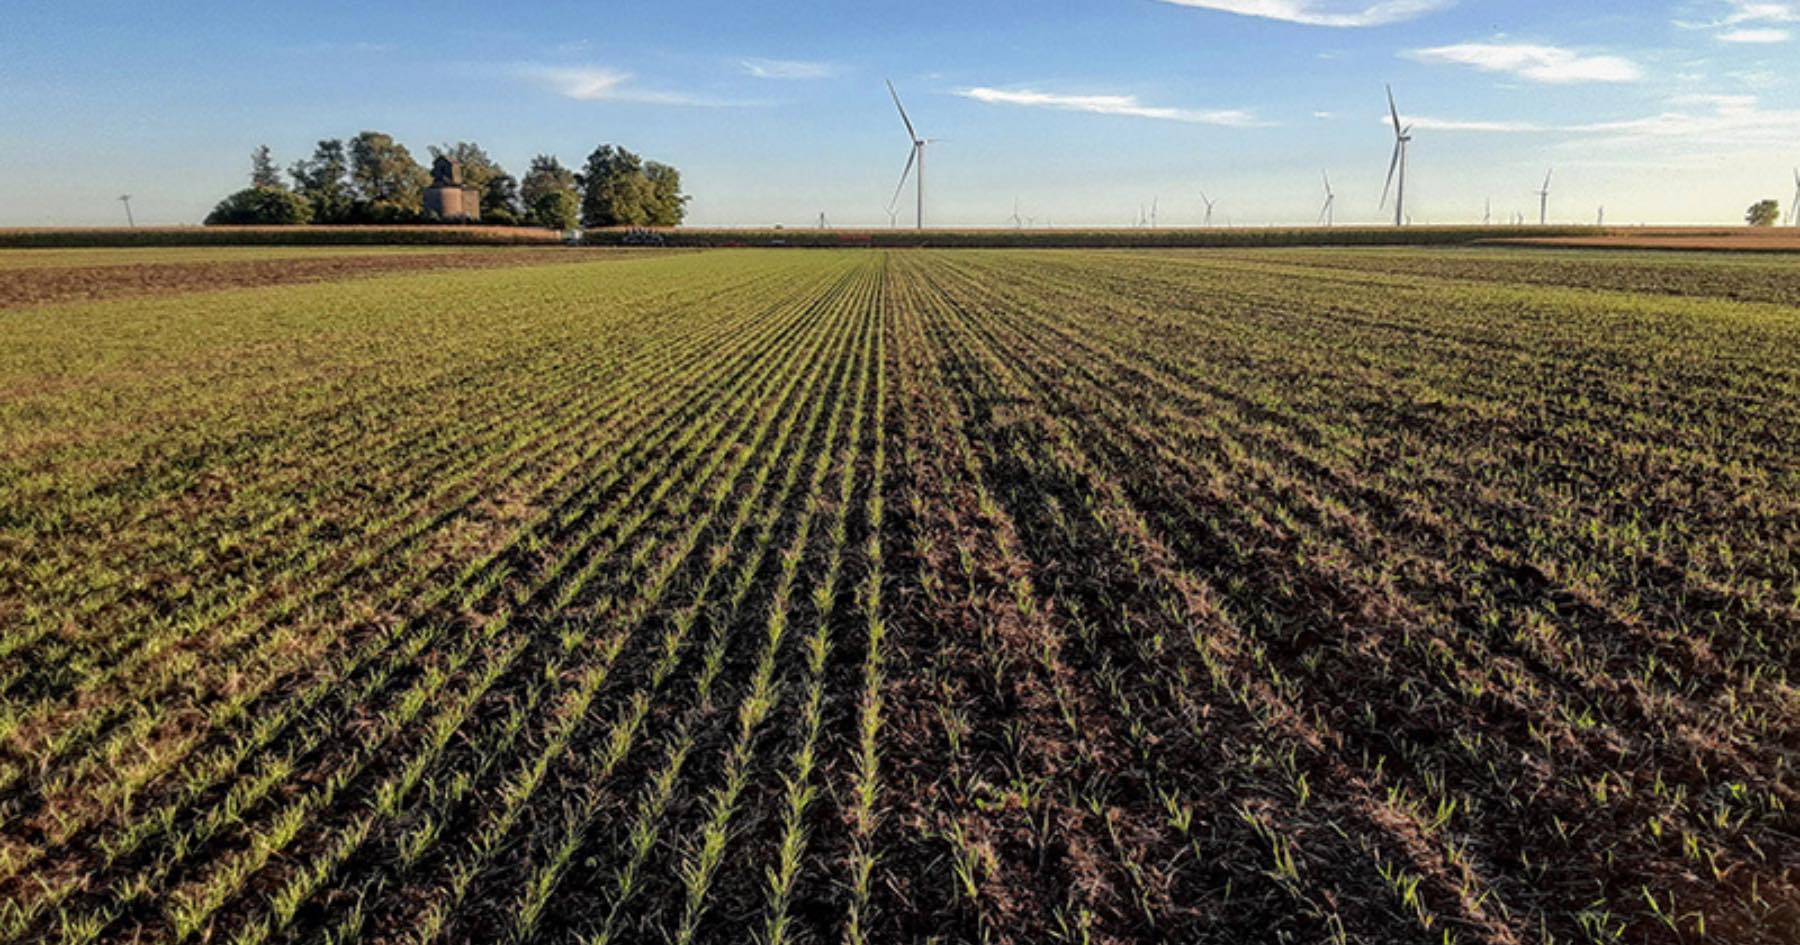 These two plots of Spooner cereal rye are under cultivation as part of a three-university study on organic farming being funded by a grant from the USDA National Institute of Food and Agriculture.